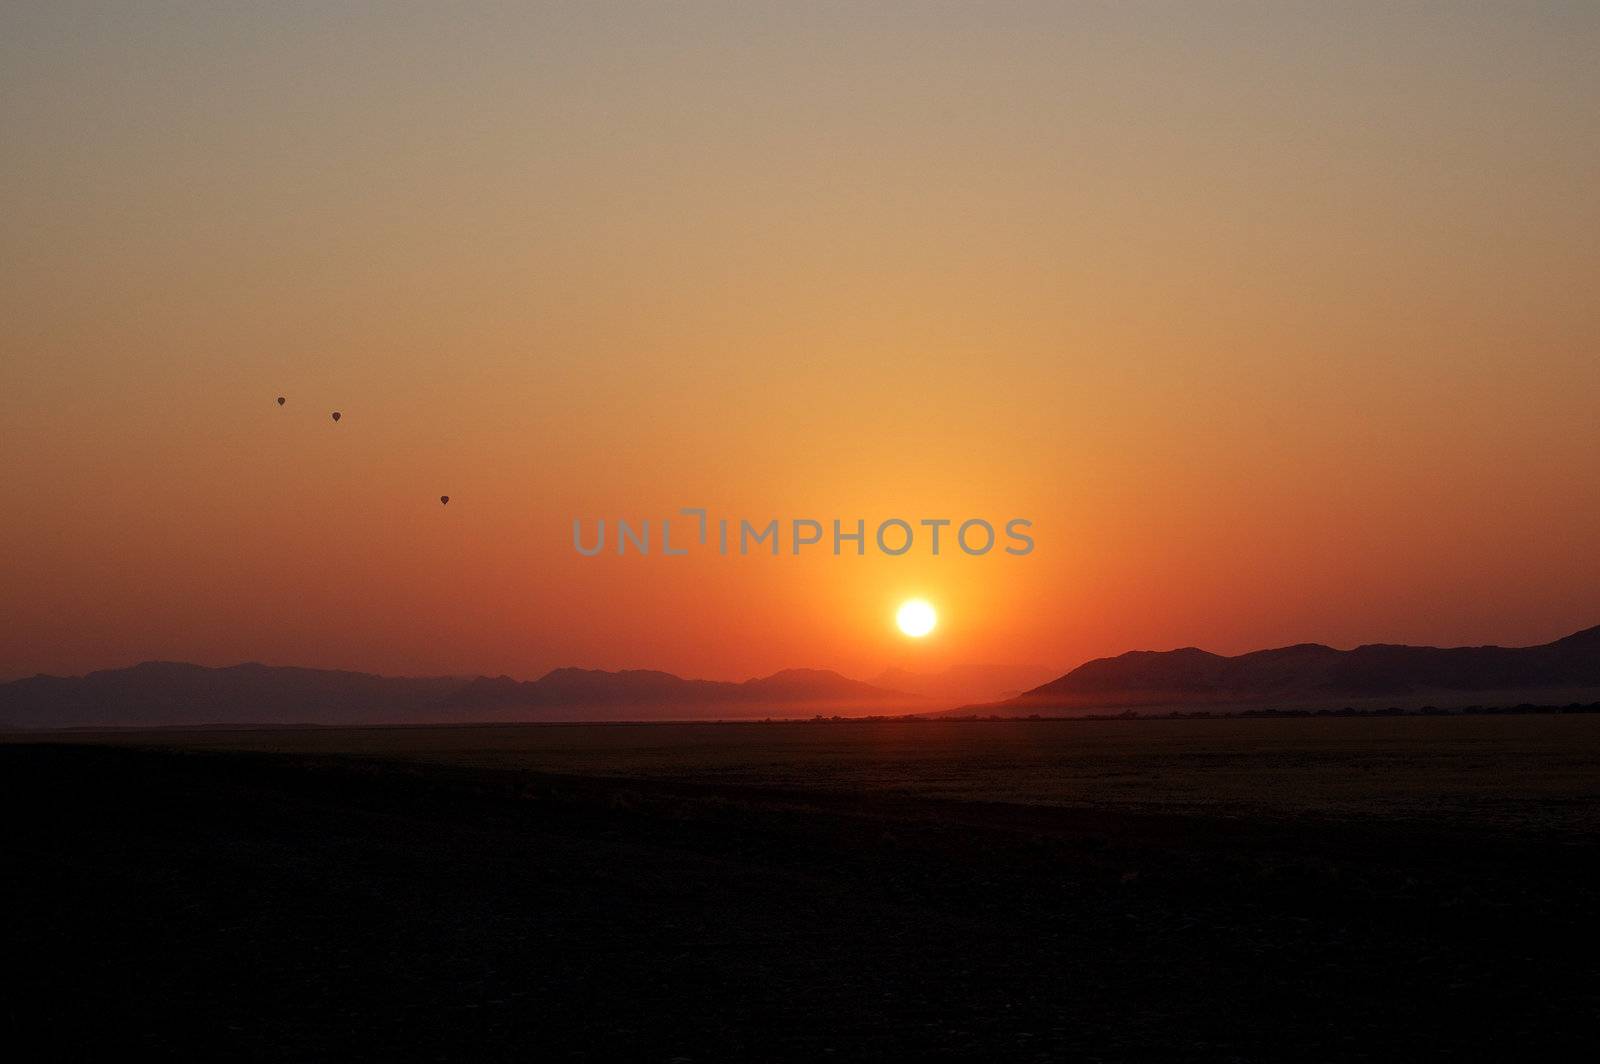 Balloons in the sky at sunrise by faberfoto